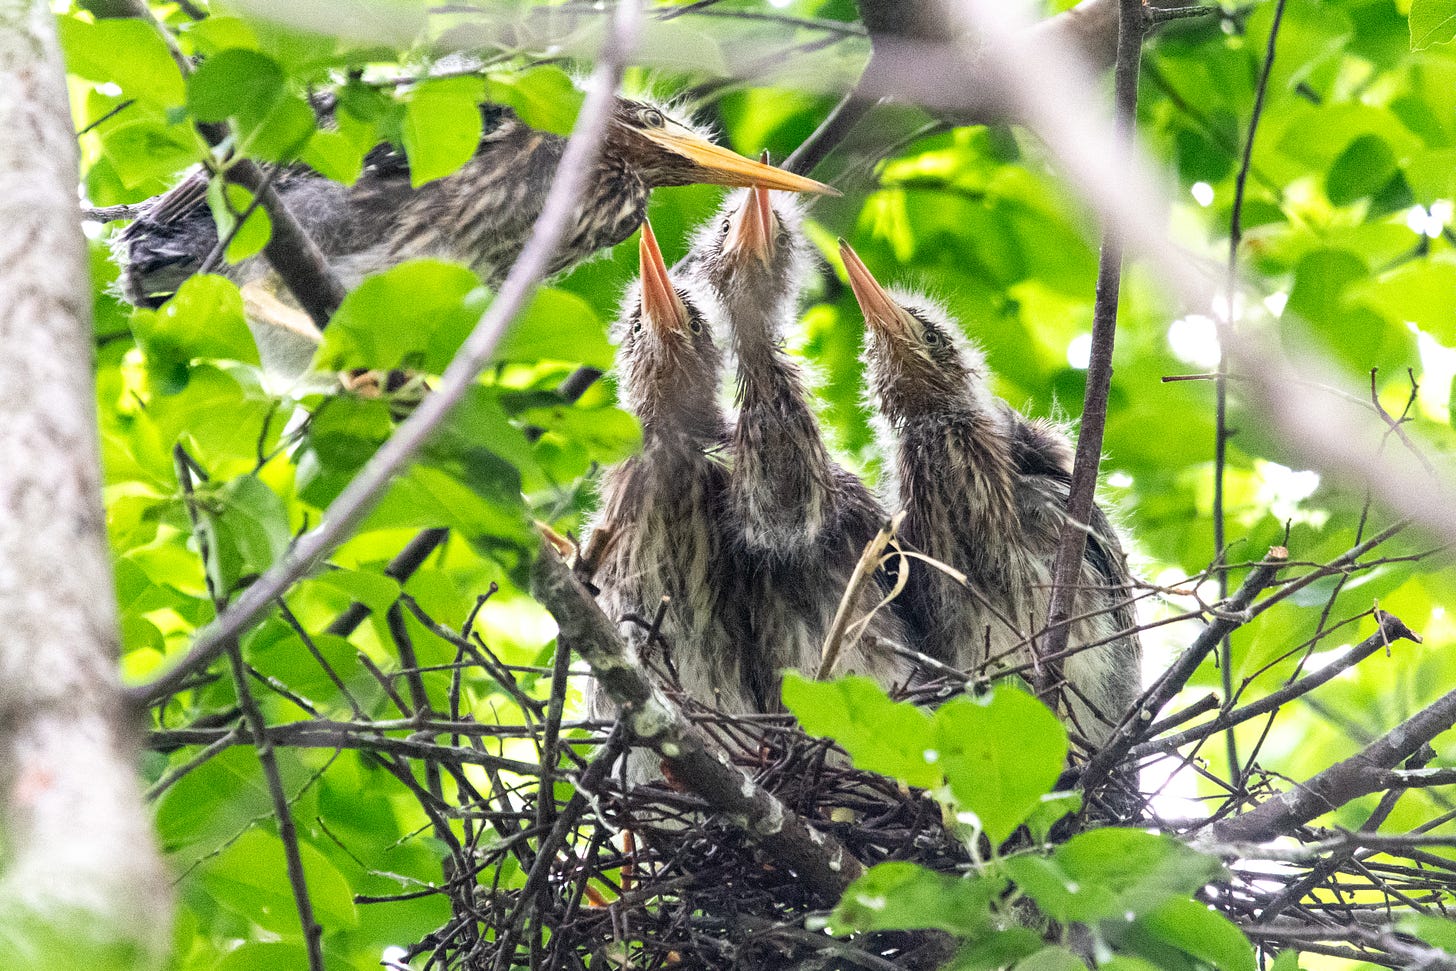 Four green heron fledglings—three standing together while the fourth perches above them—wait on their nest of sticks for a parent to bring something hapless, which they will eat with their sharp orange beaks